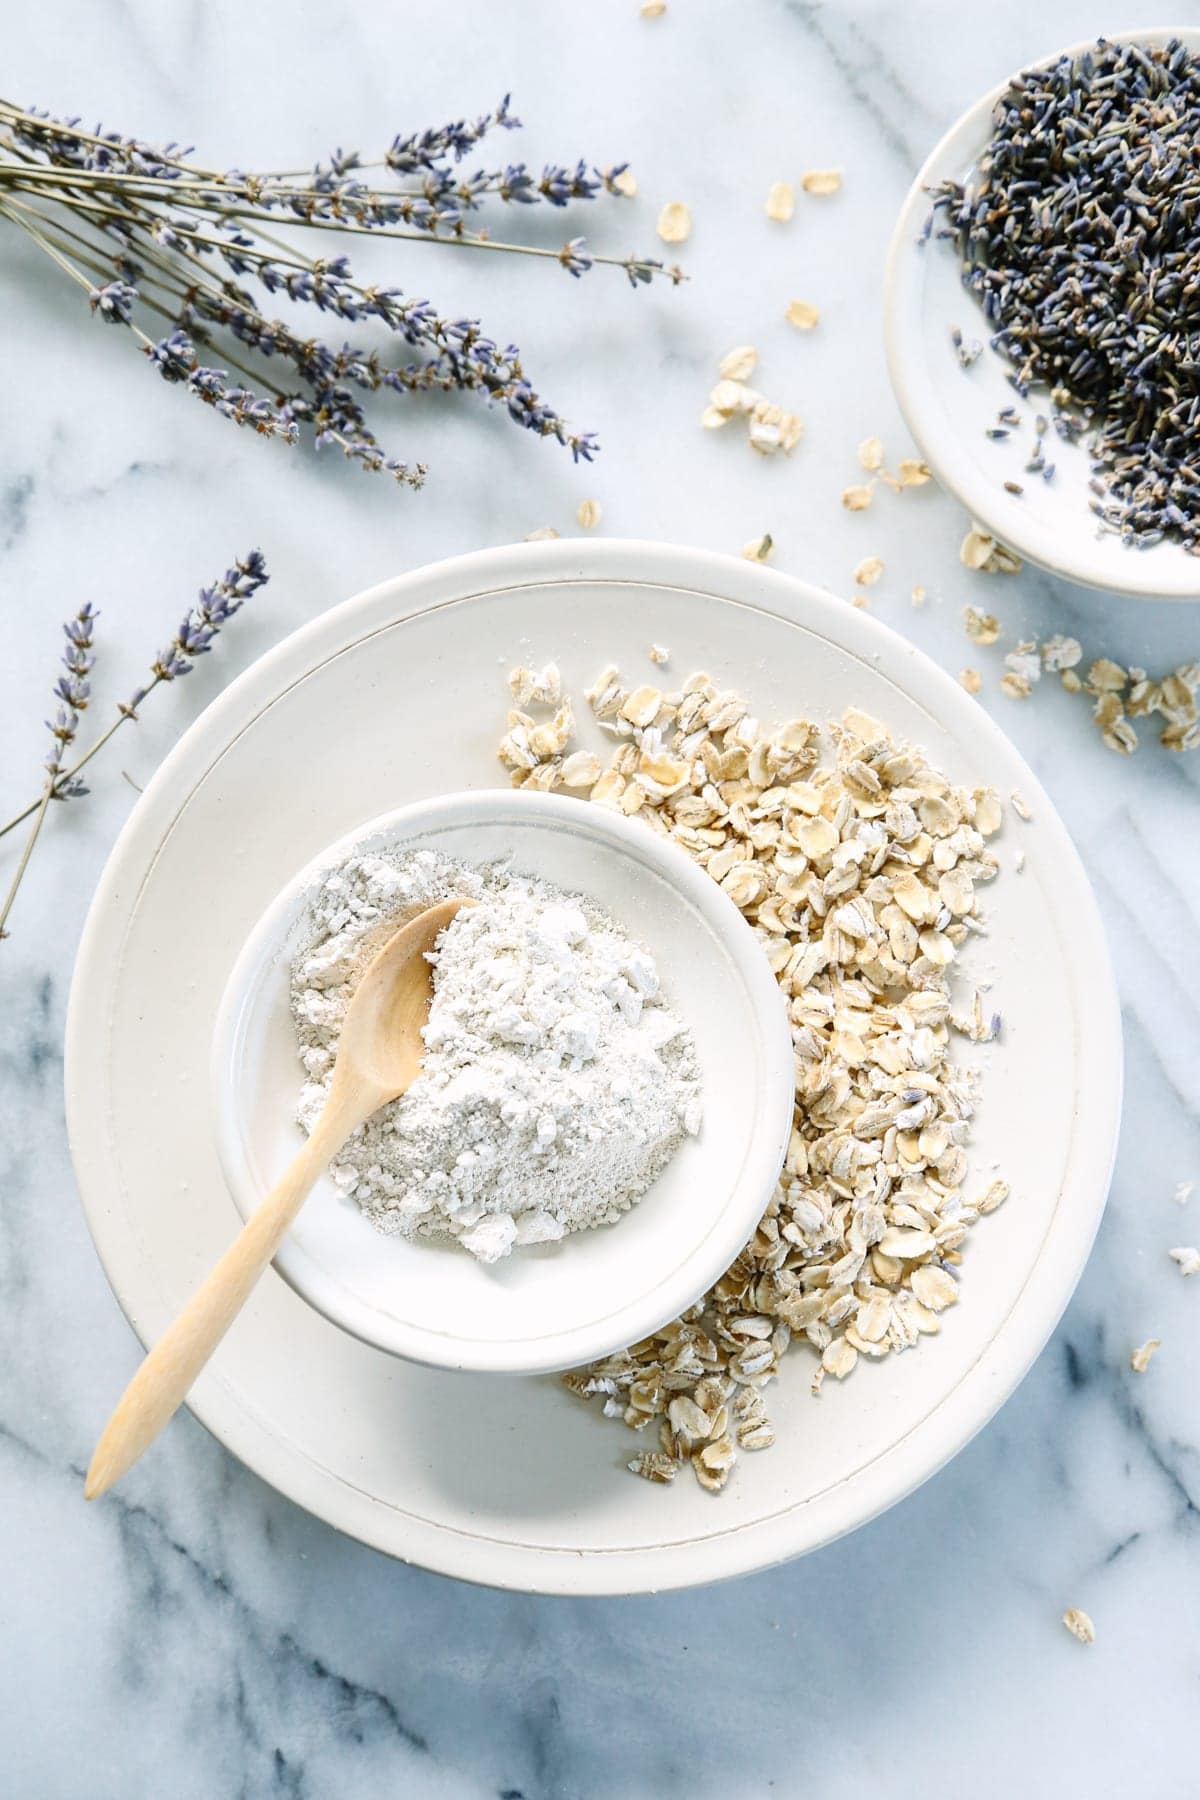 A bowl of oatmeal and powdered lavender cleansing grains